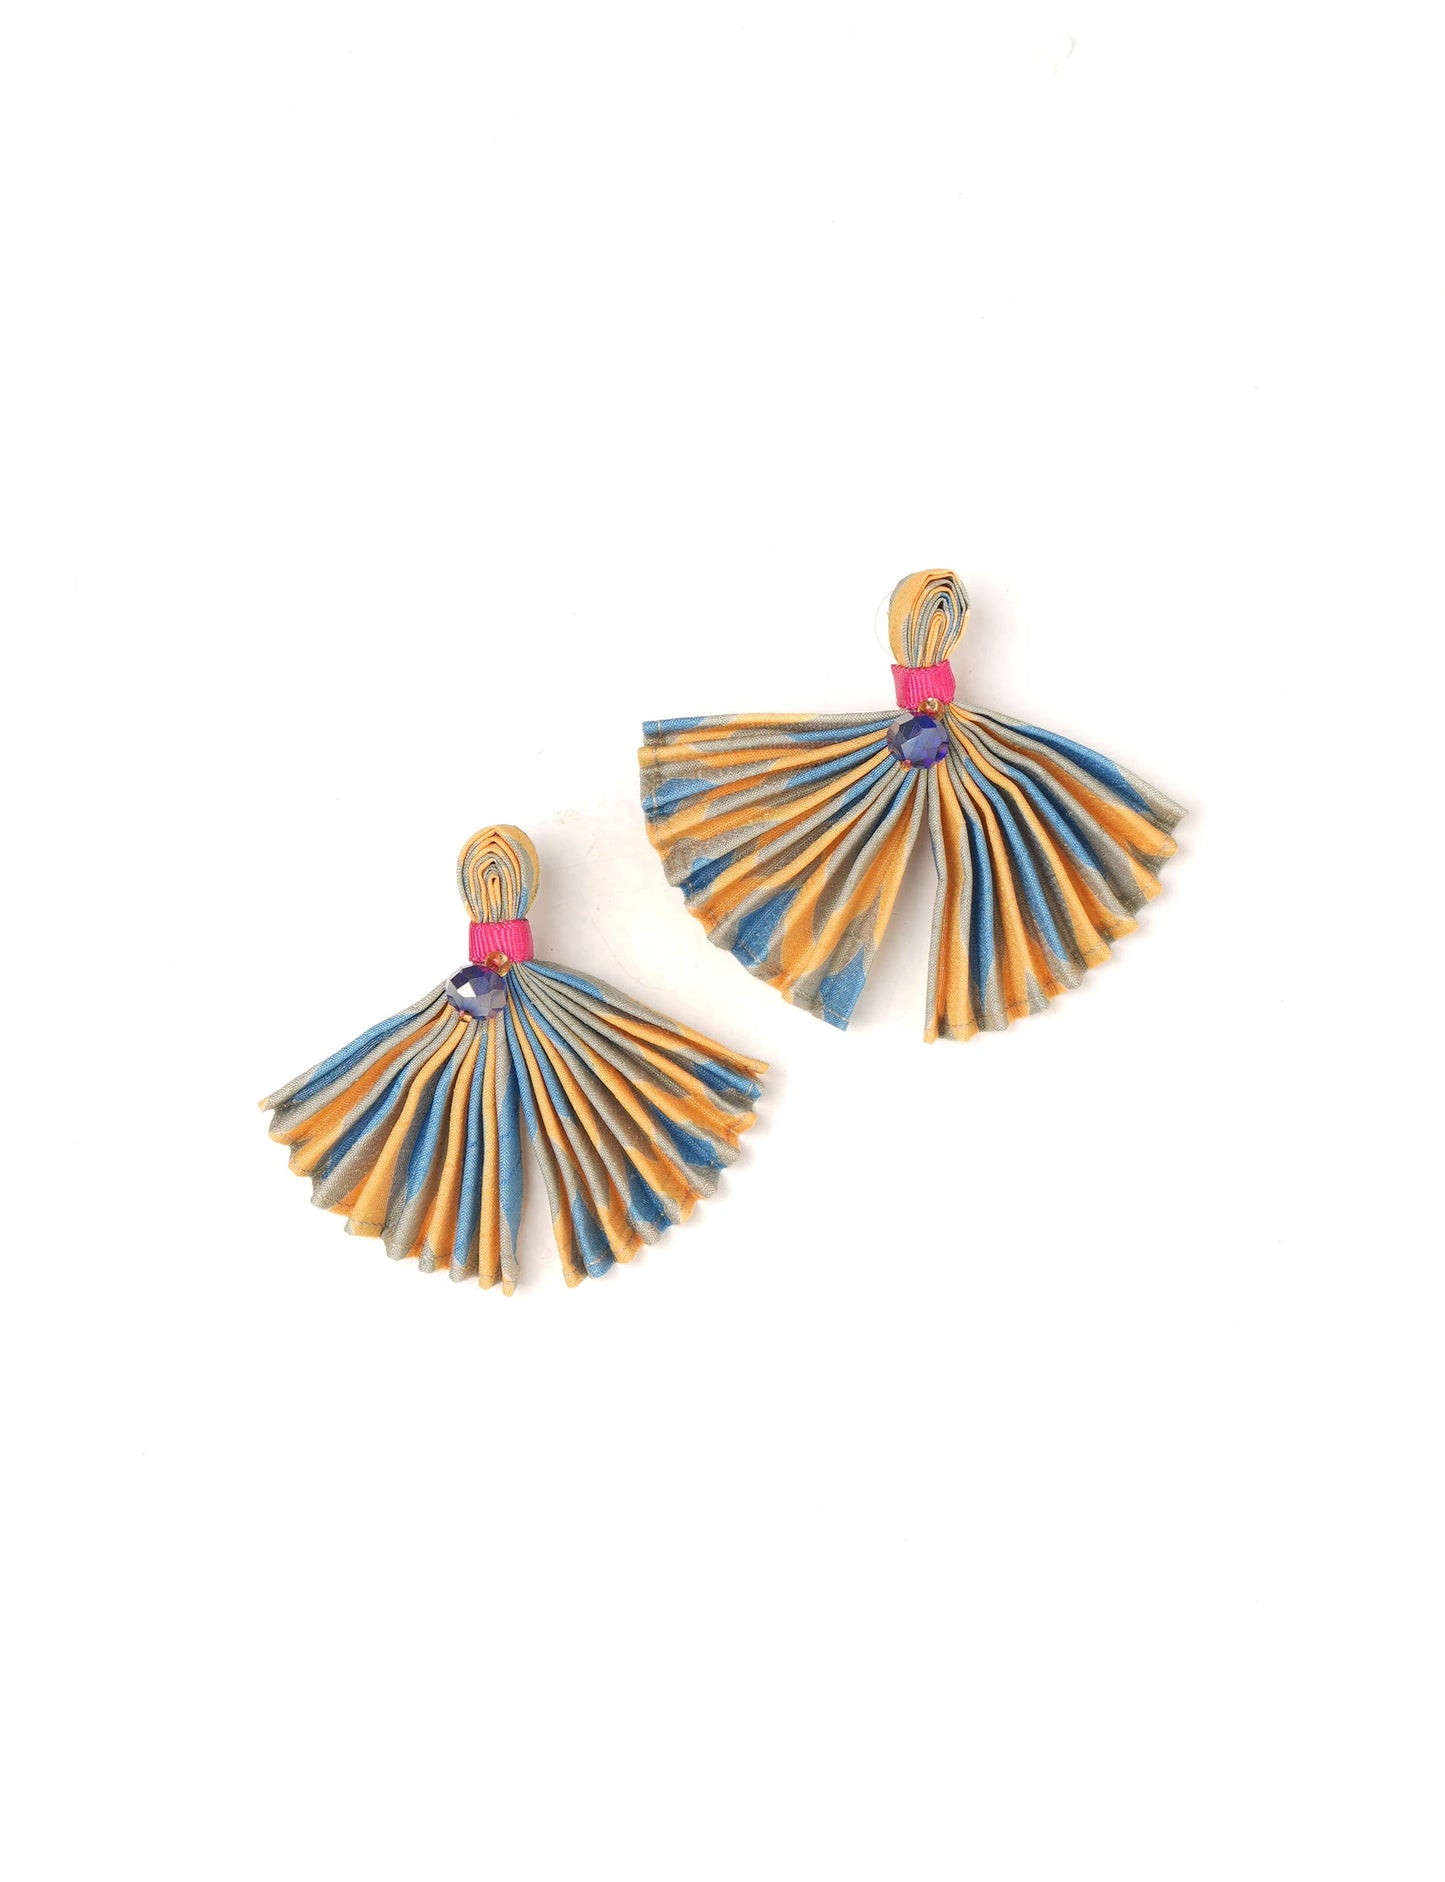 Adorn yourself sustainably with our PLEATED EARRINGS – fan-shaped wonders with a top knot and a tiny stone. Meticulously hand-pleated from Indian saris, these earrings reflect ethical clothing, green fashion, and slow fashion. Fastened with hypoallergy tested metal hooks, nickel, and lead-free, making them a conscious and stylish accessory.